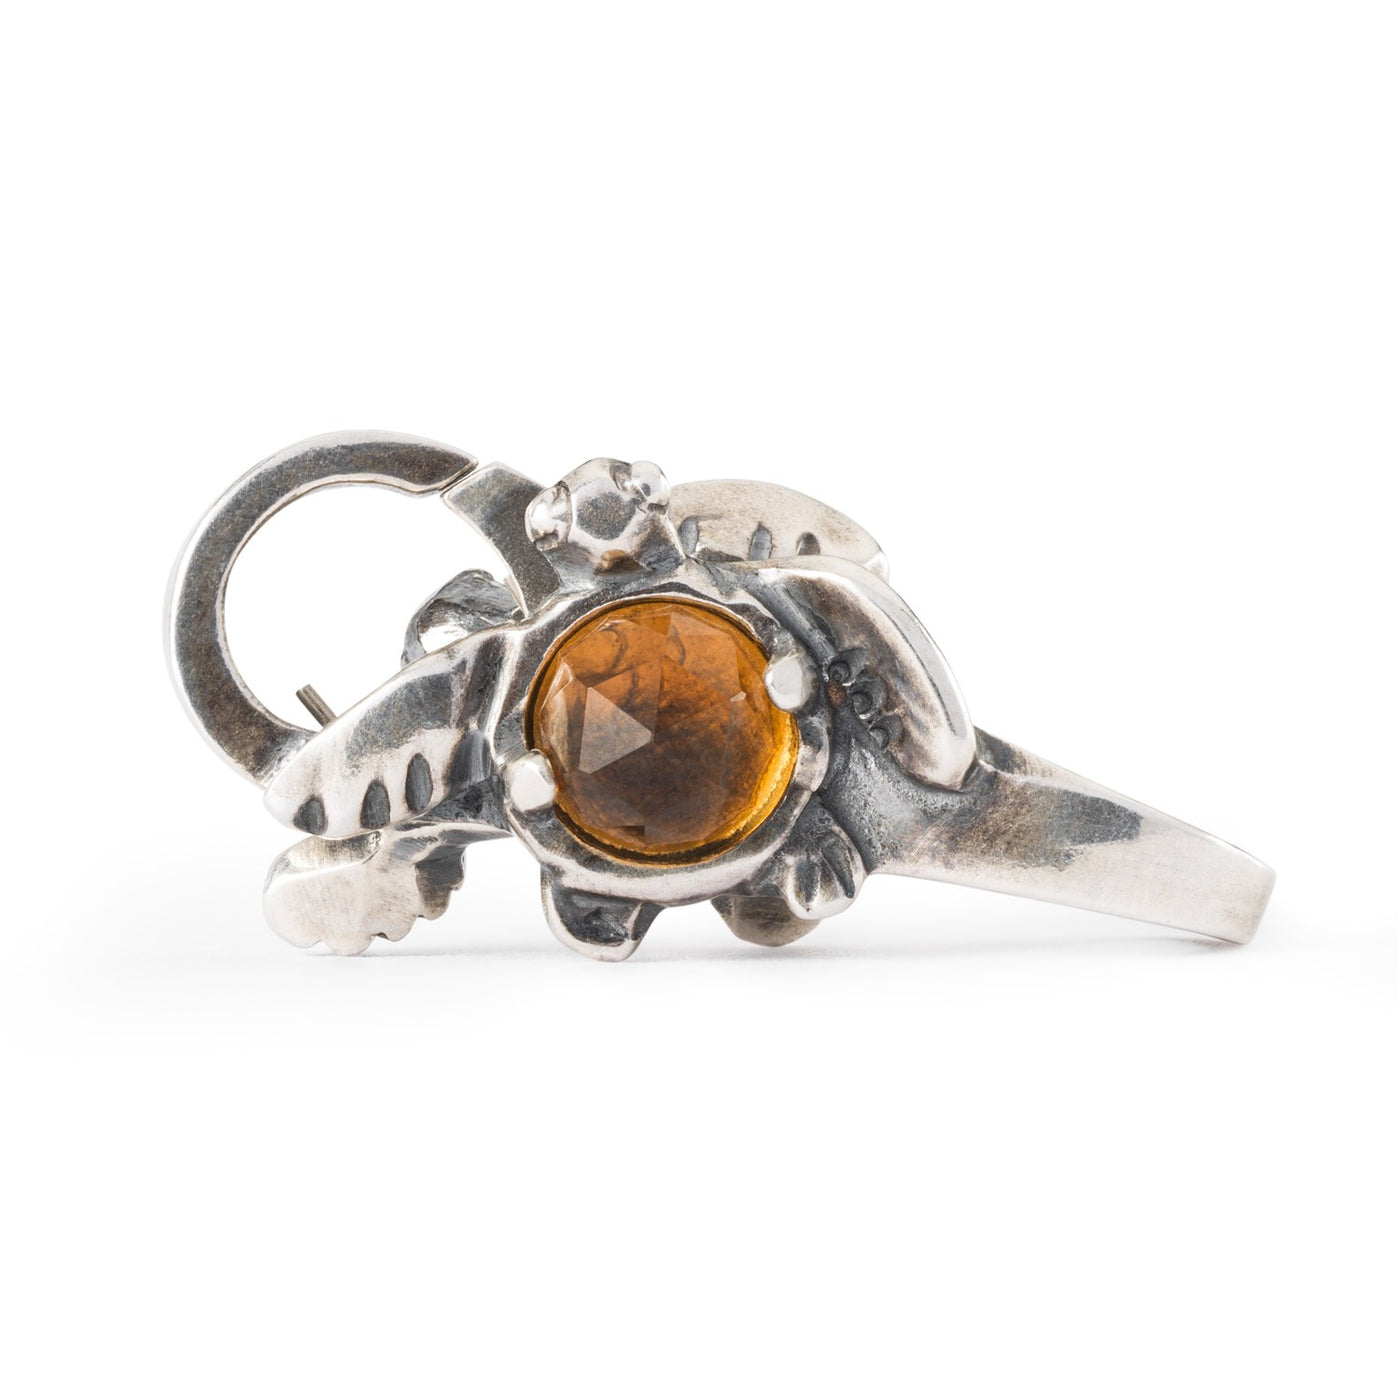 Turtle clasp with a citrine quarts stone